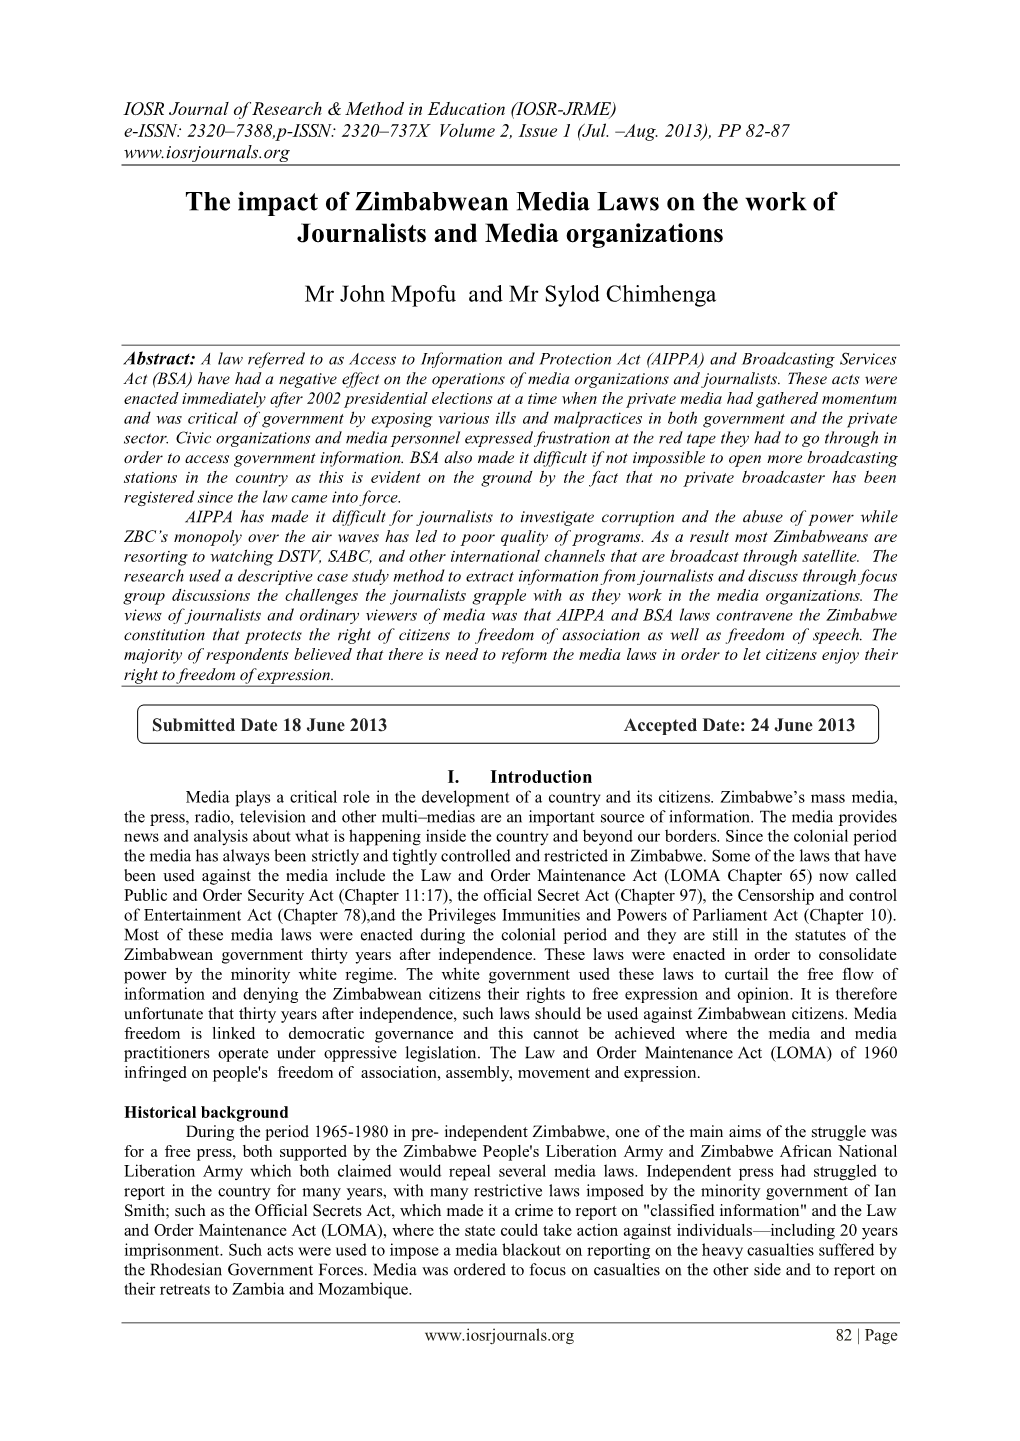 The Impact of Zimbabwean Media Laws on the Work of Journalists and Media Organizations